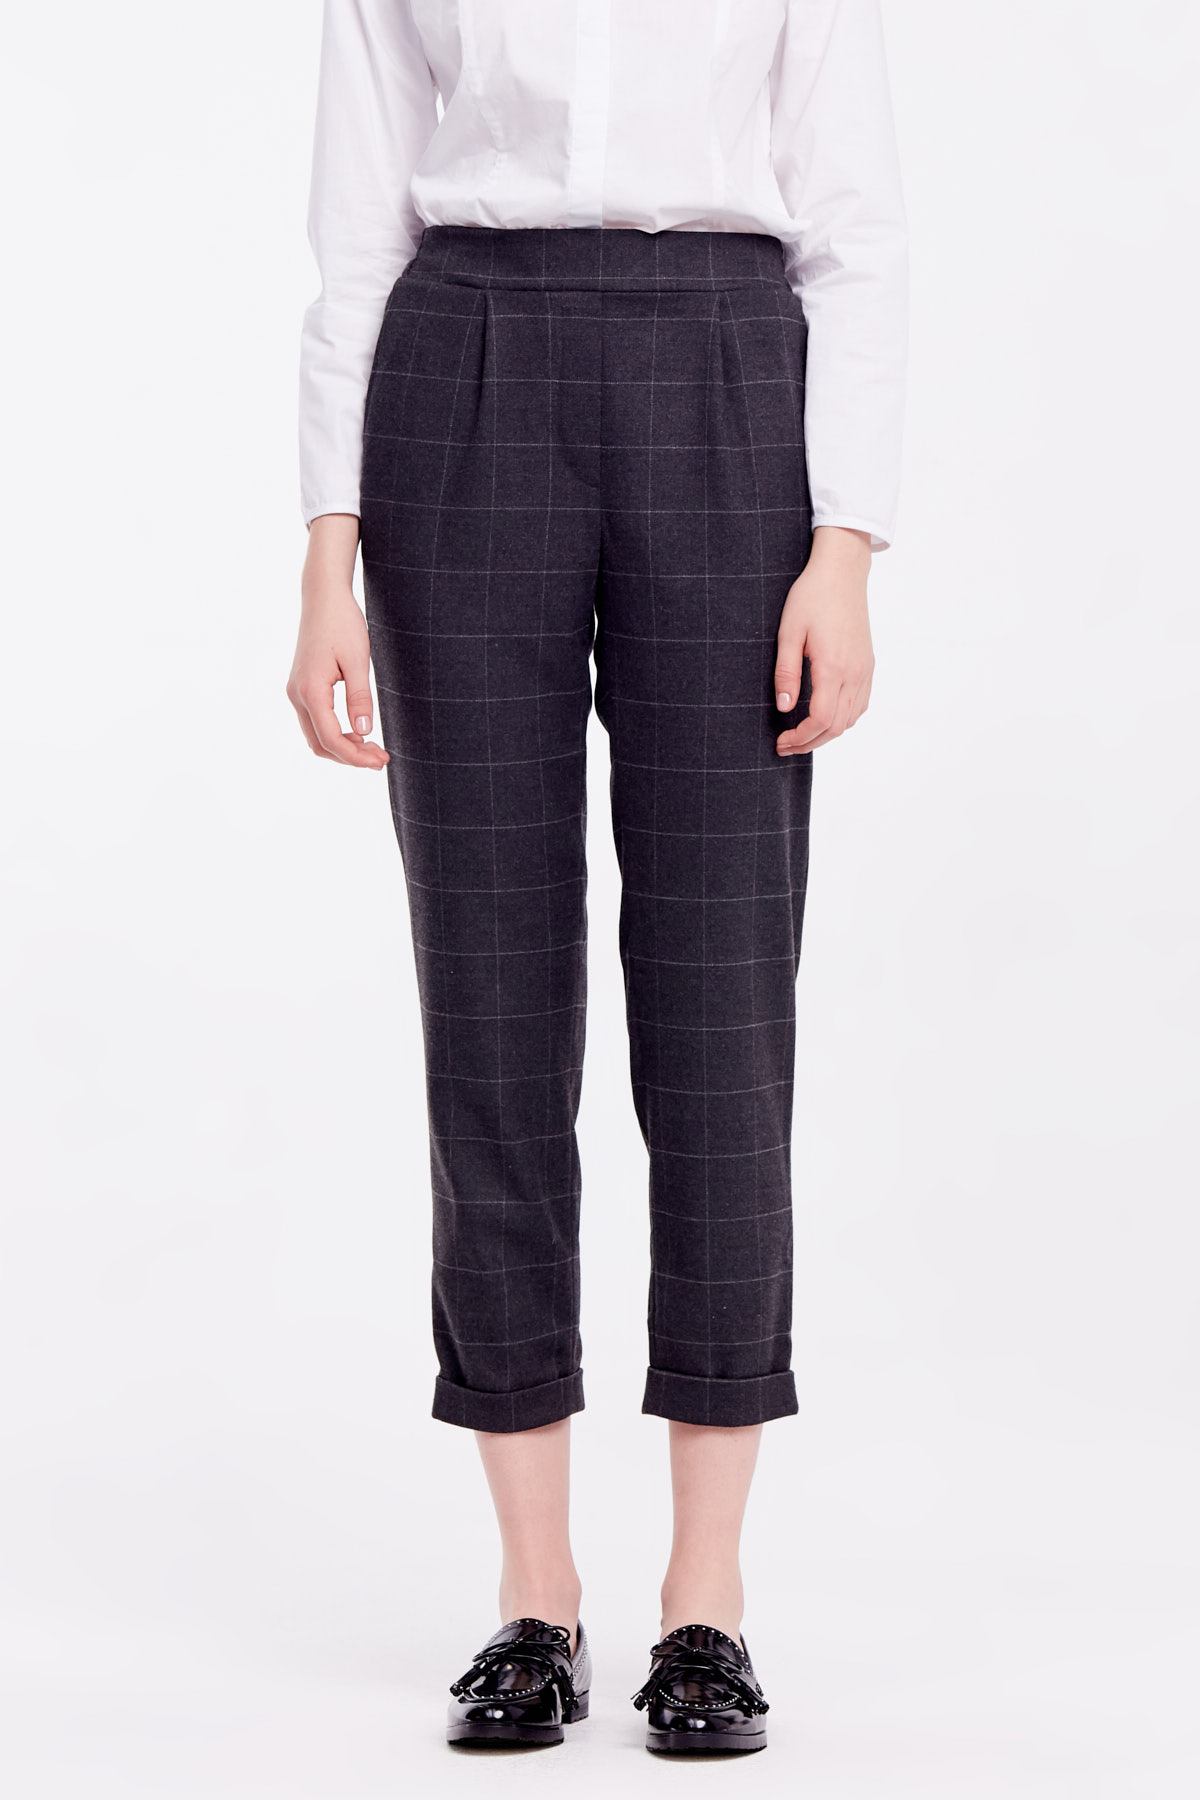 Loose grey checkered pants with cuffs, photo 3